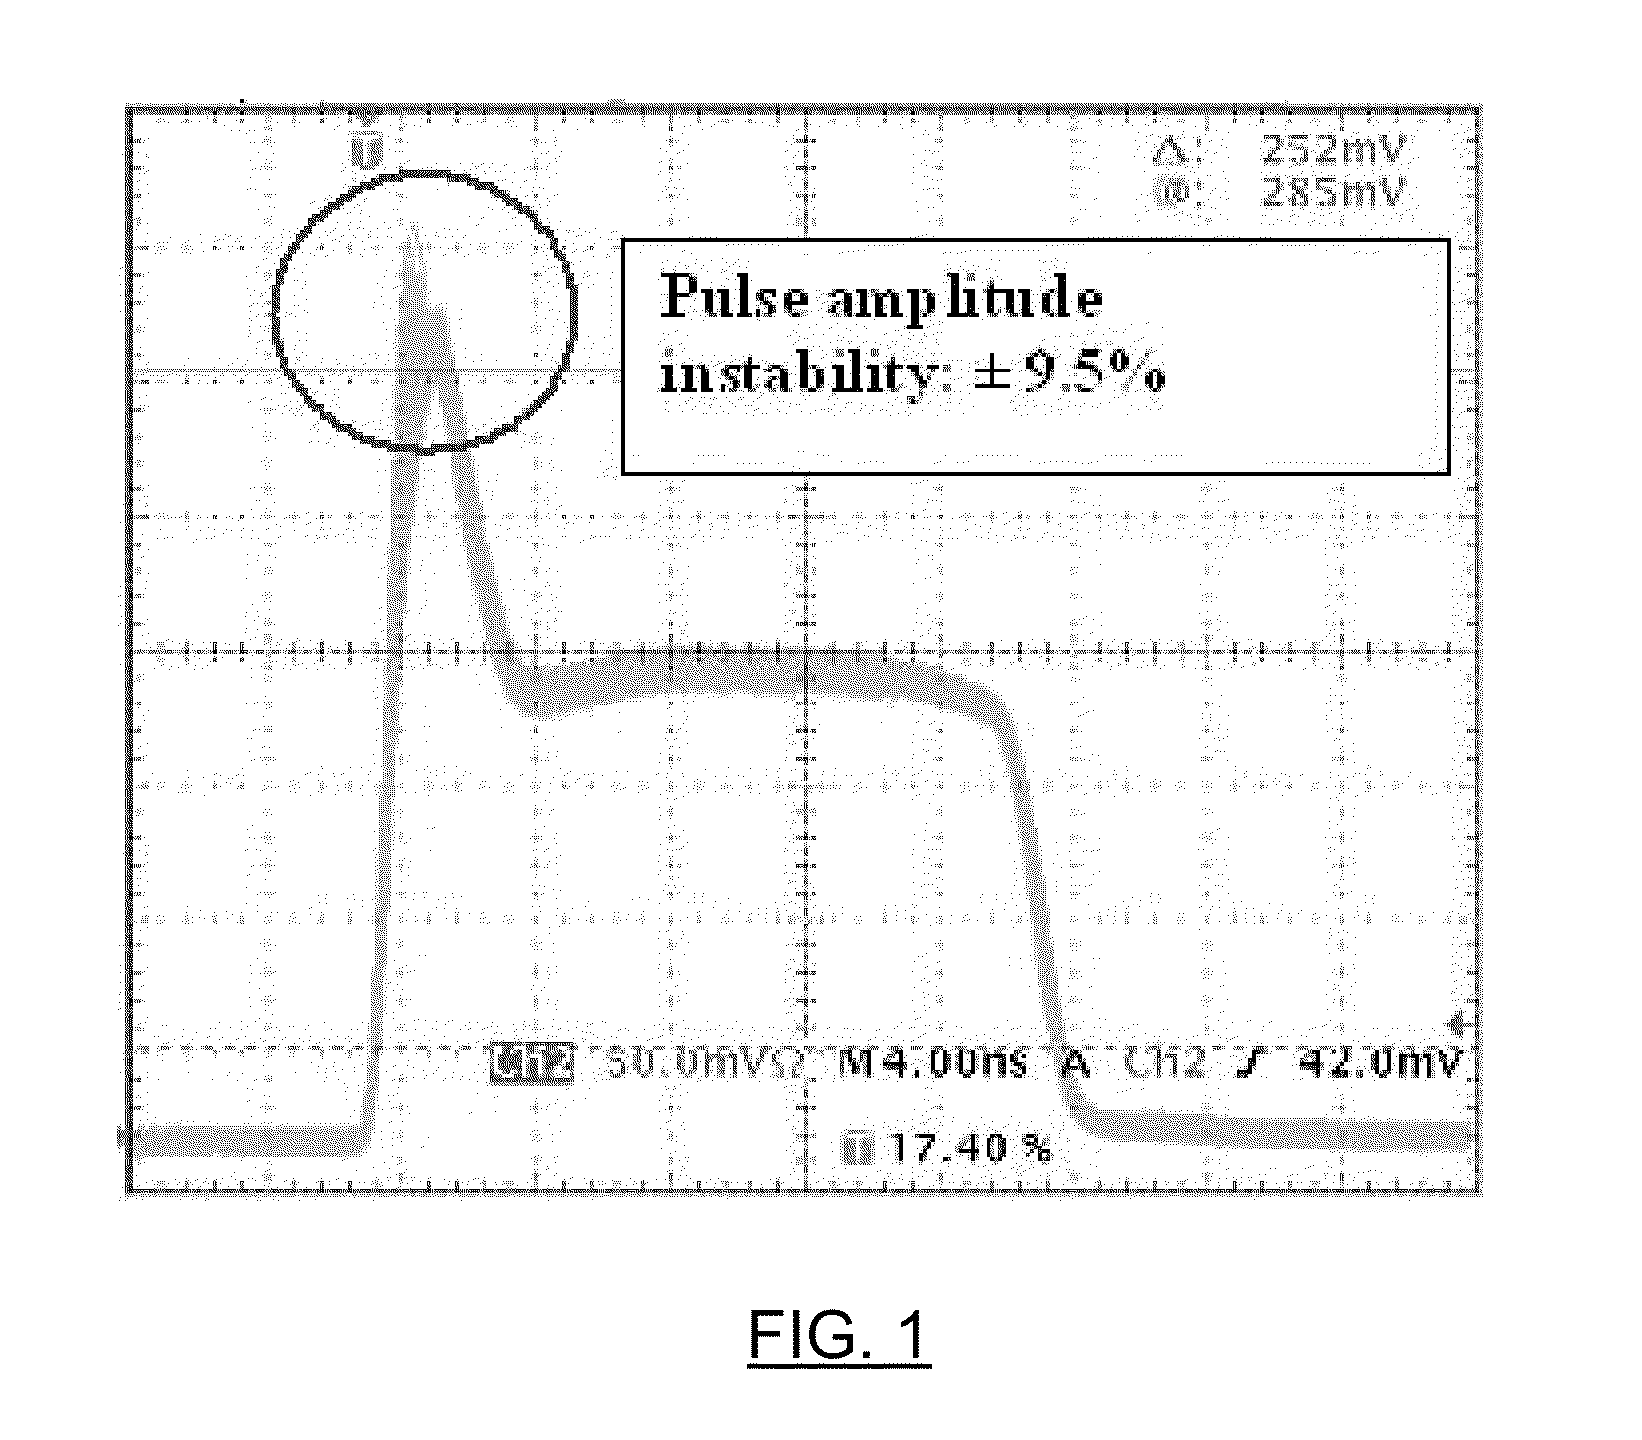 Method for stablizing an output of a pulsed laser system using pulse shaping